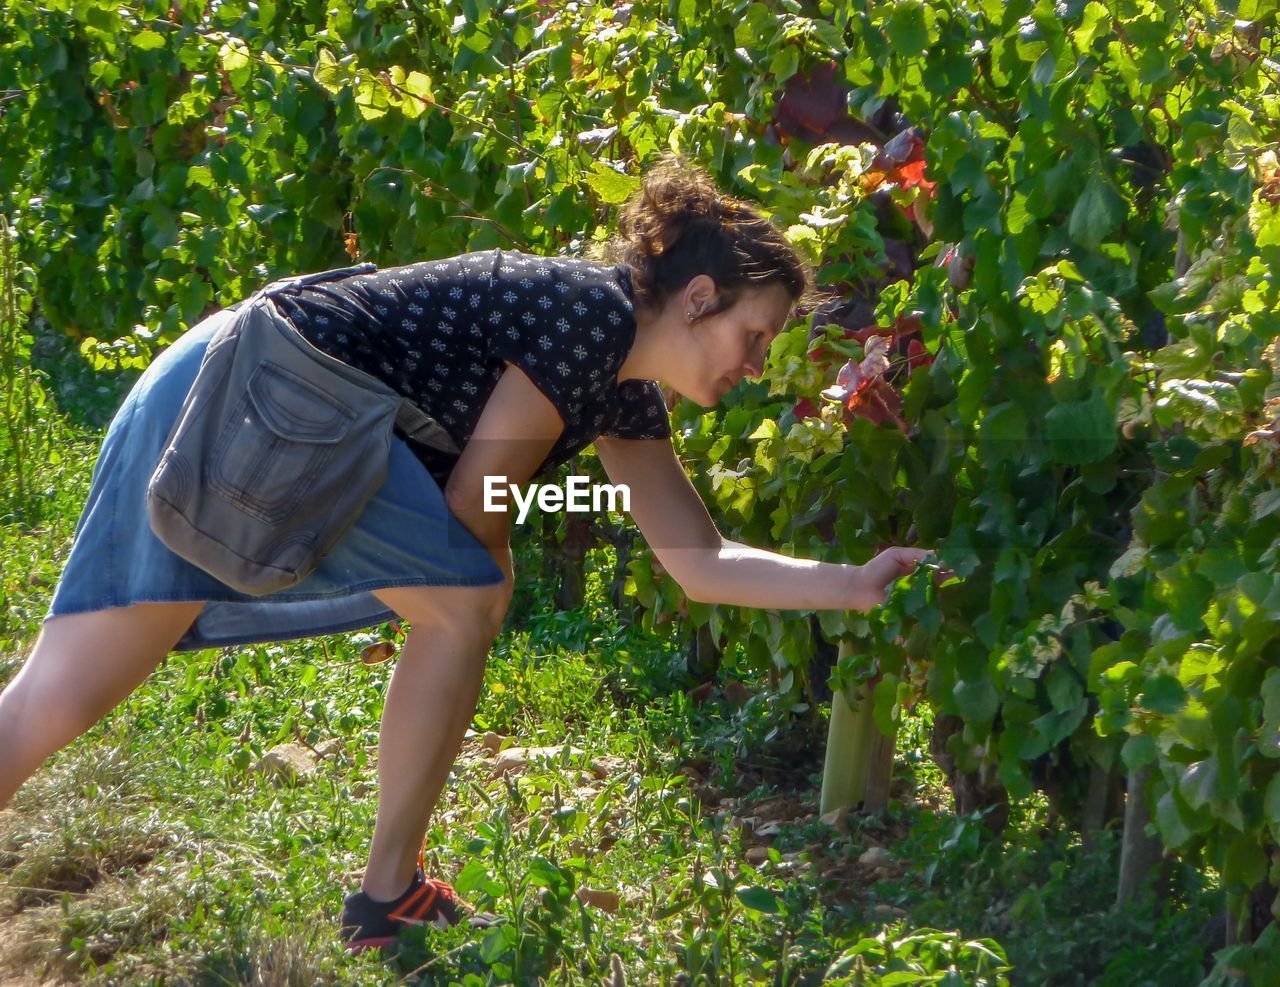 Young woman touching plants in vineyard